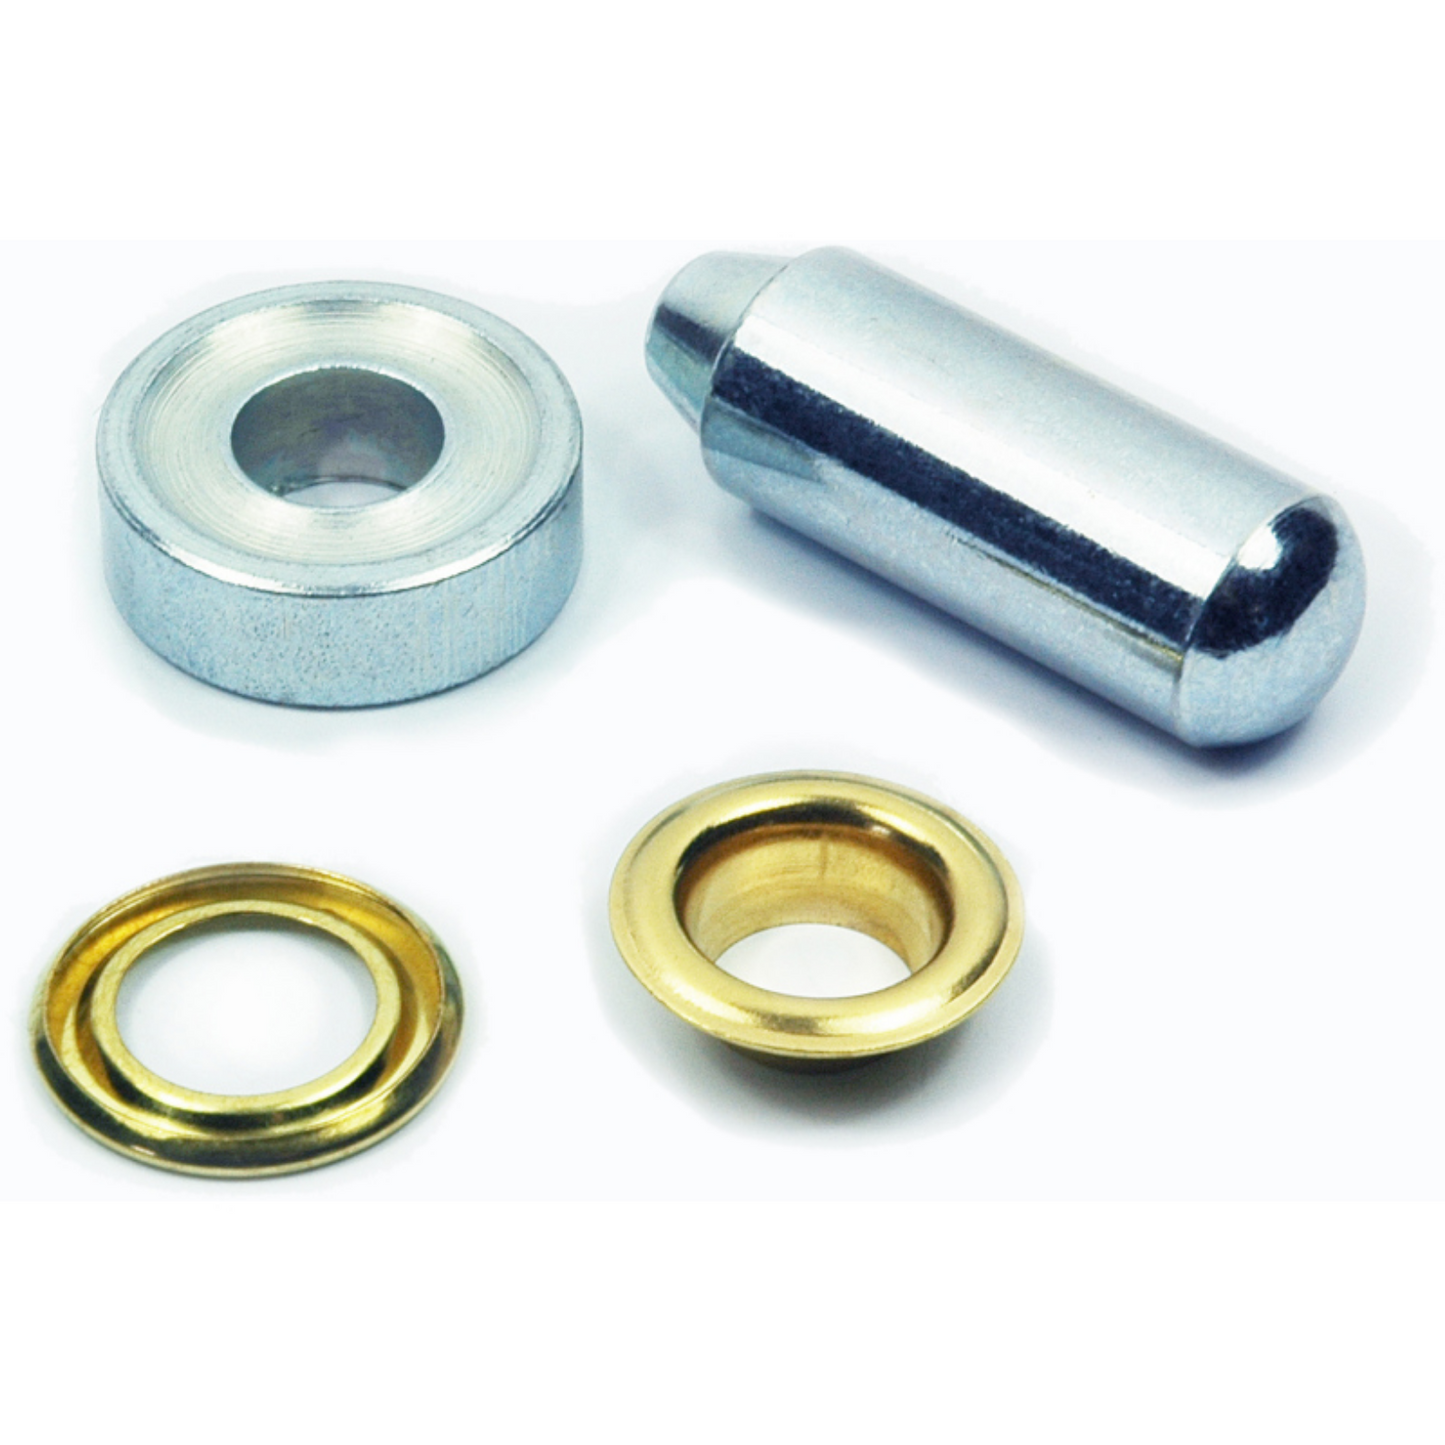 Marine Brass Eyelet Kit 3/8" 9.5mm (25) and 1/2" 12.7mm (15) Covers Tents Tarpaulines